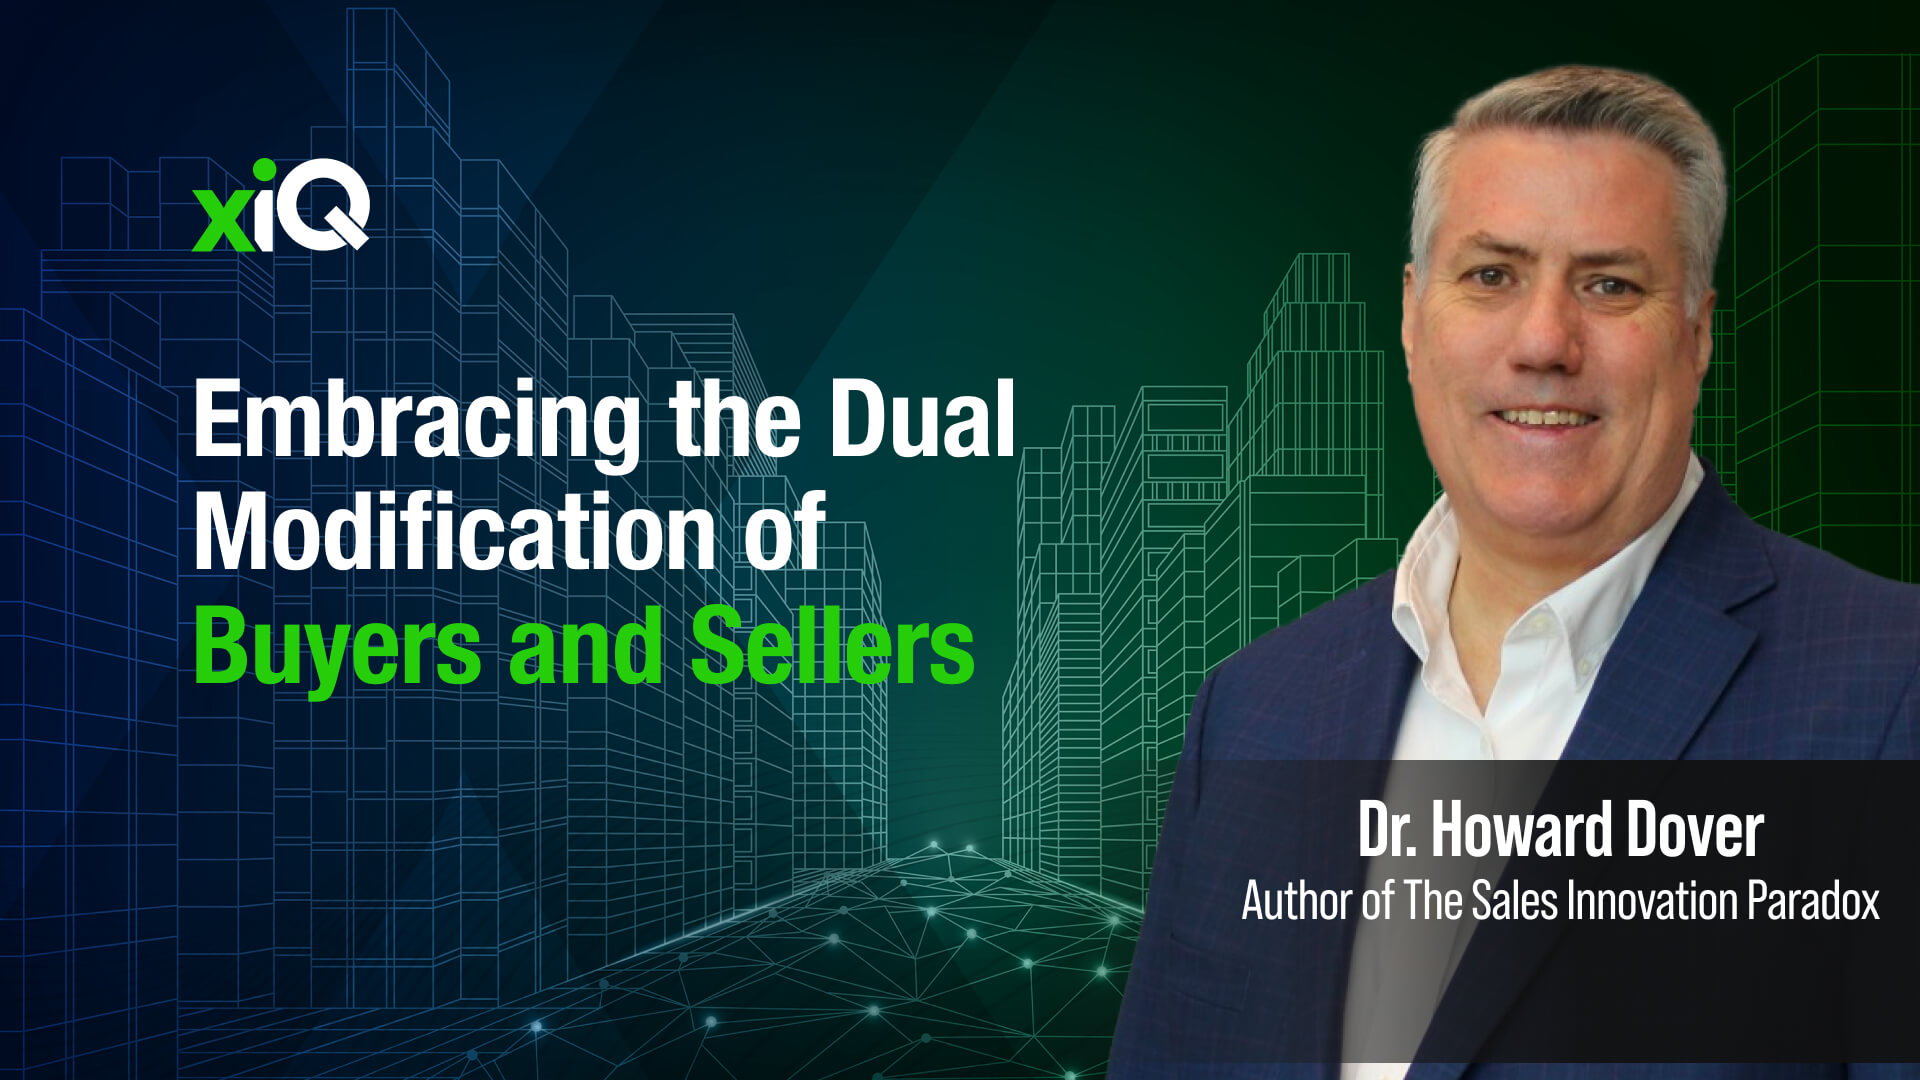 Embracing the Dual Modification of Buyers and Sellers